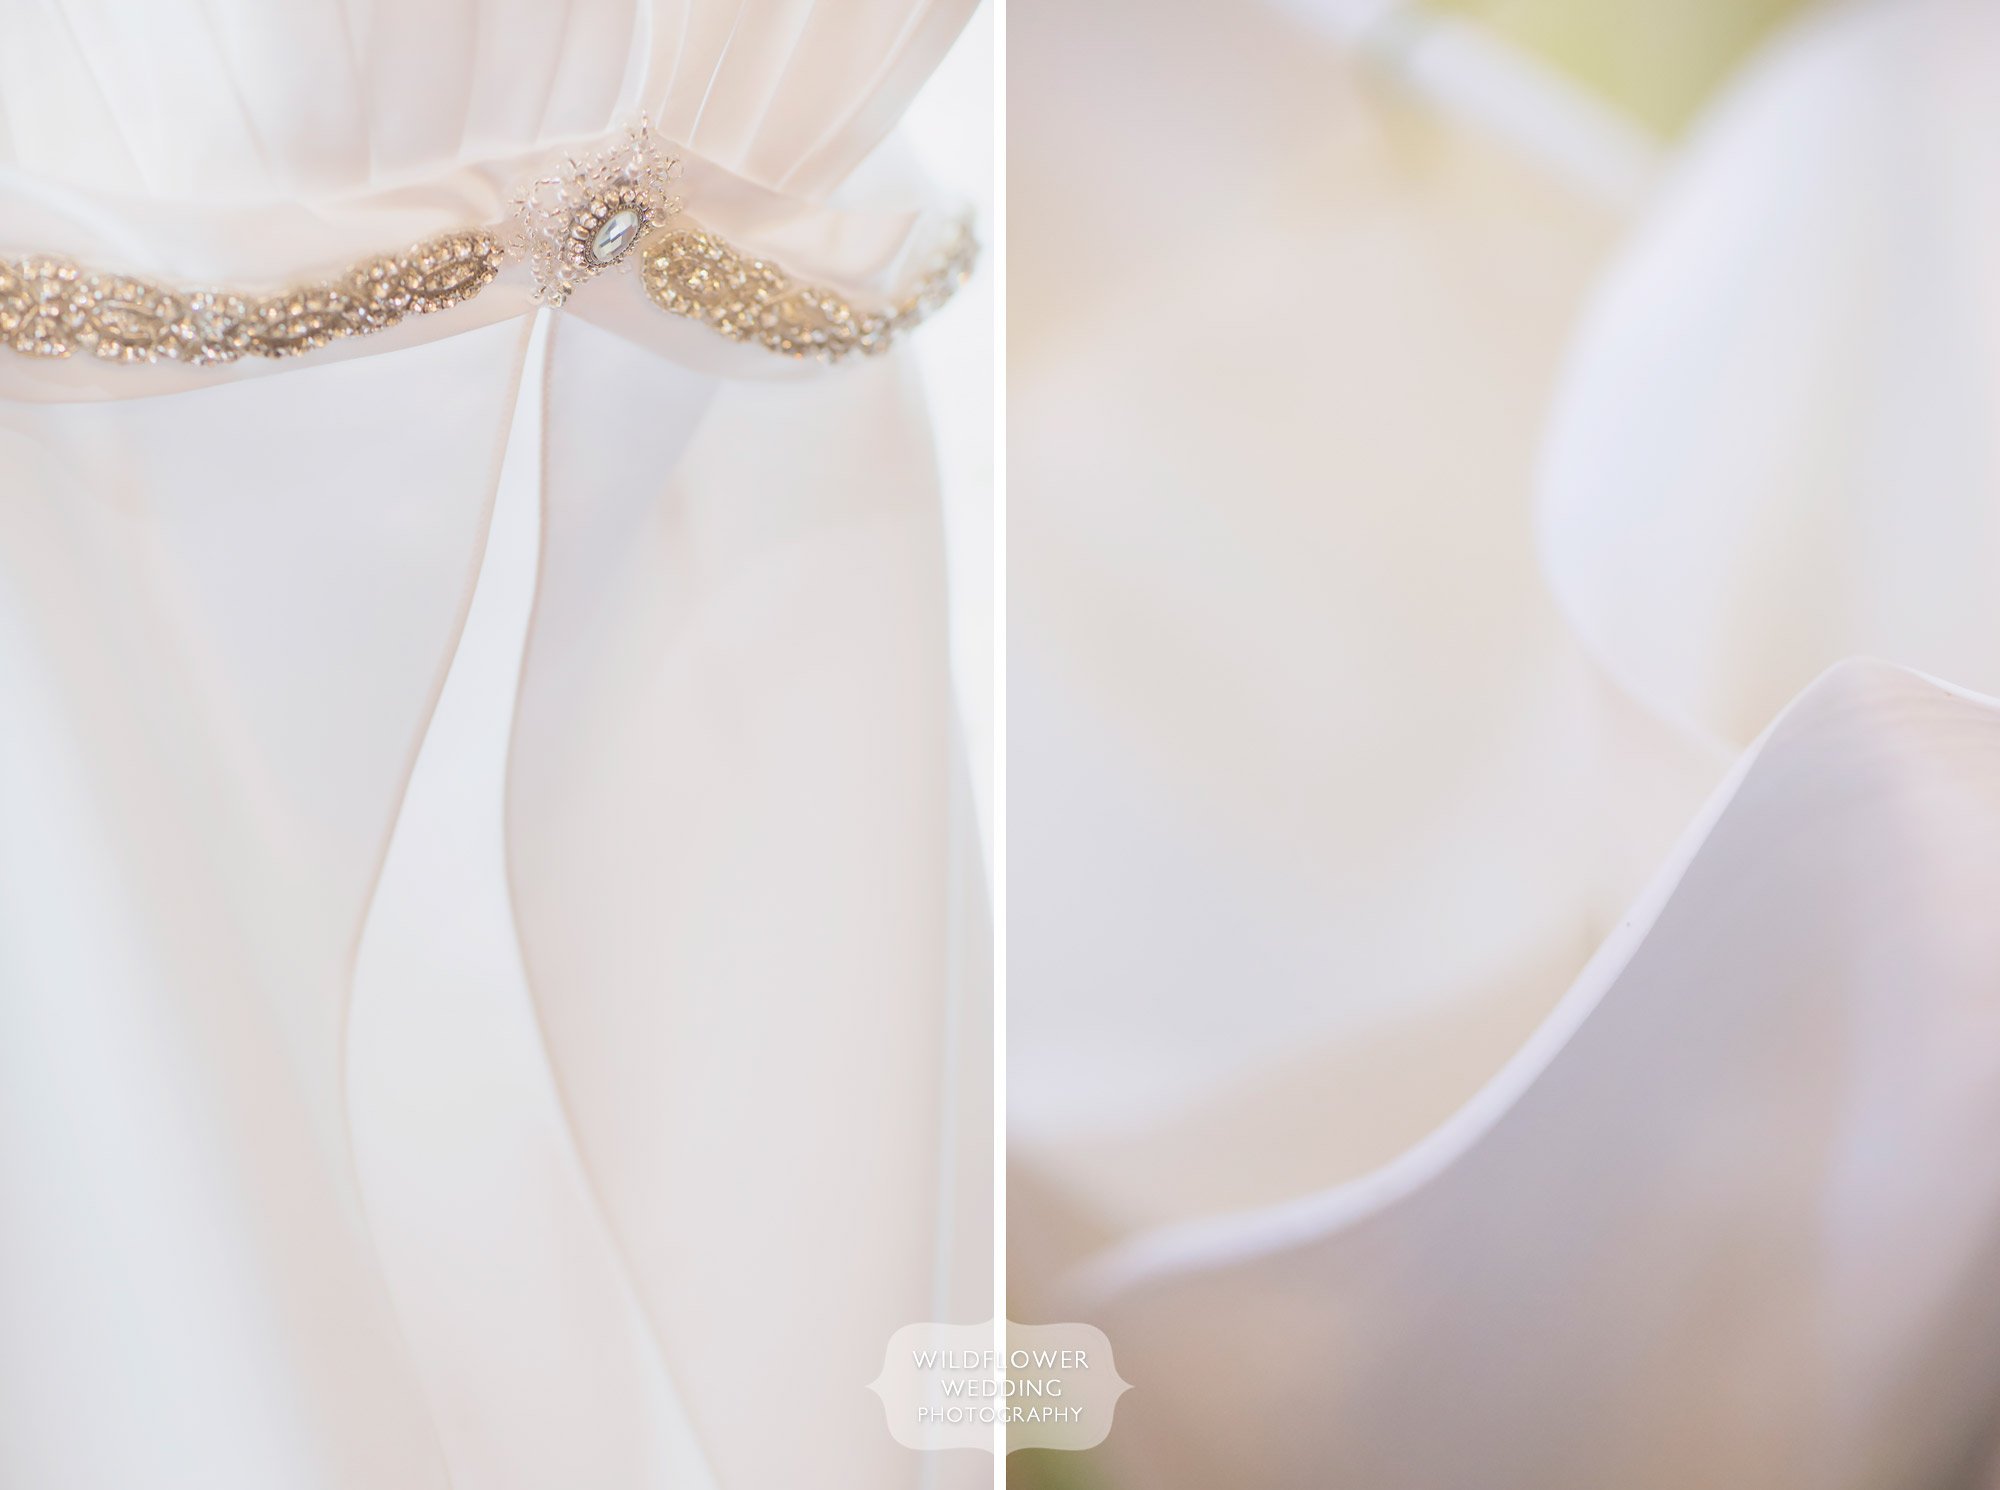 Artistic wedding photo of bride's dress with calla lily flowers at this Kansas barn wedding.